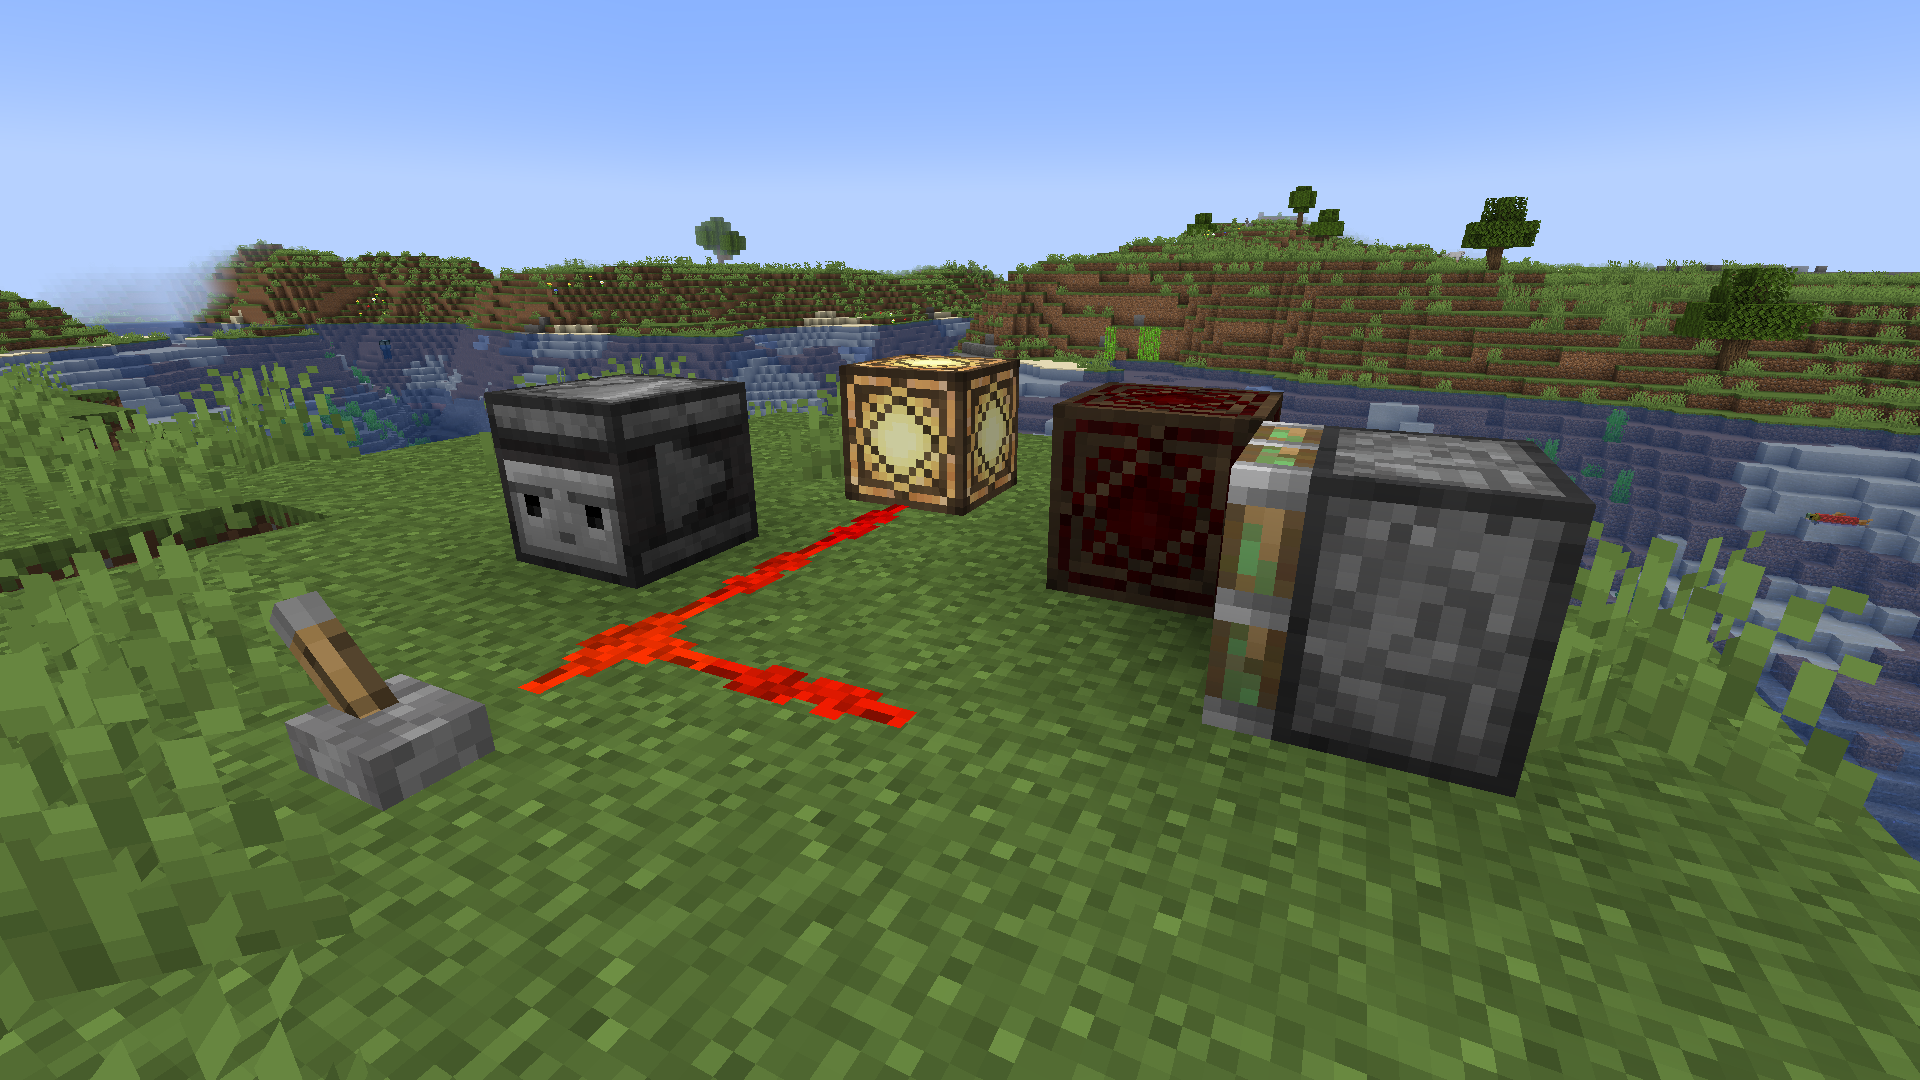 Easy to understand such as redstone and observer